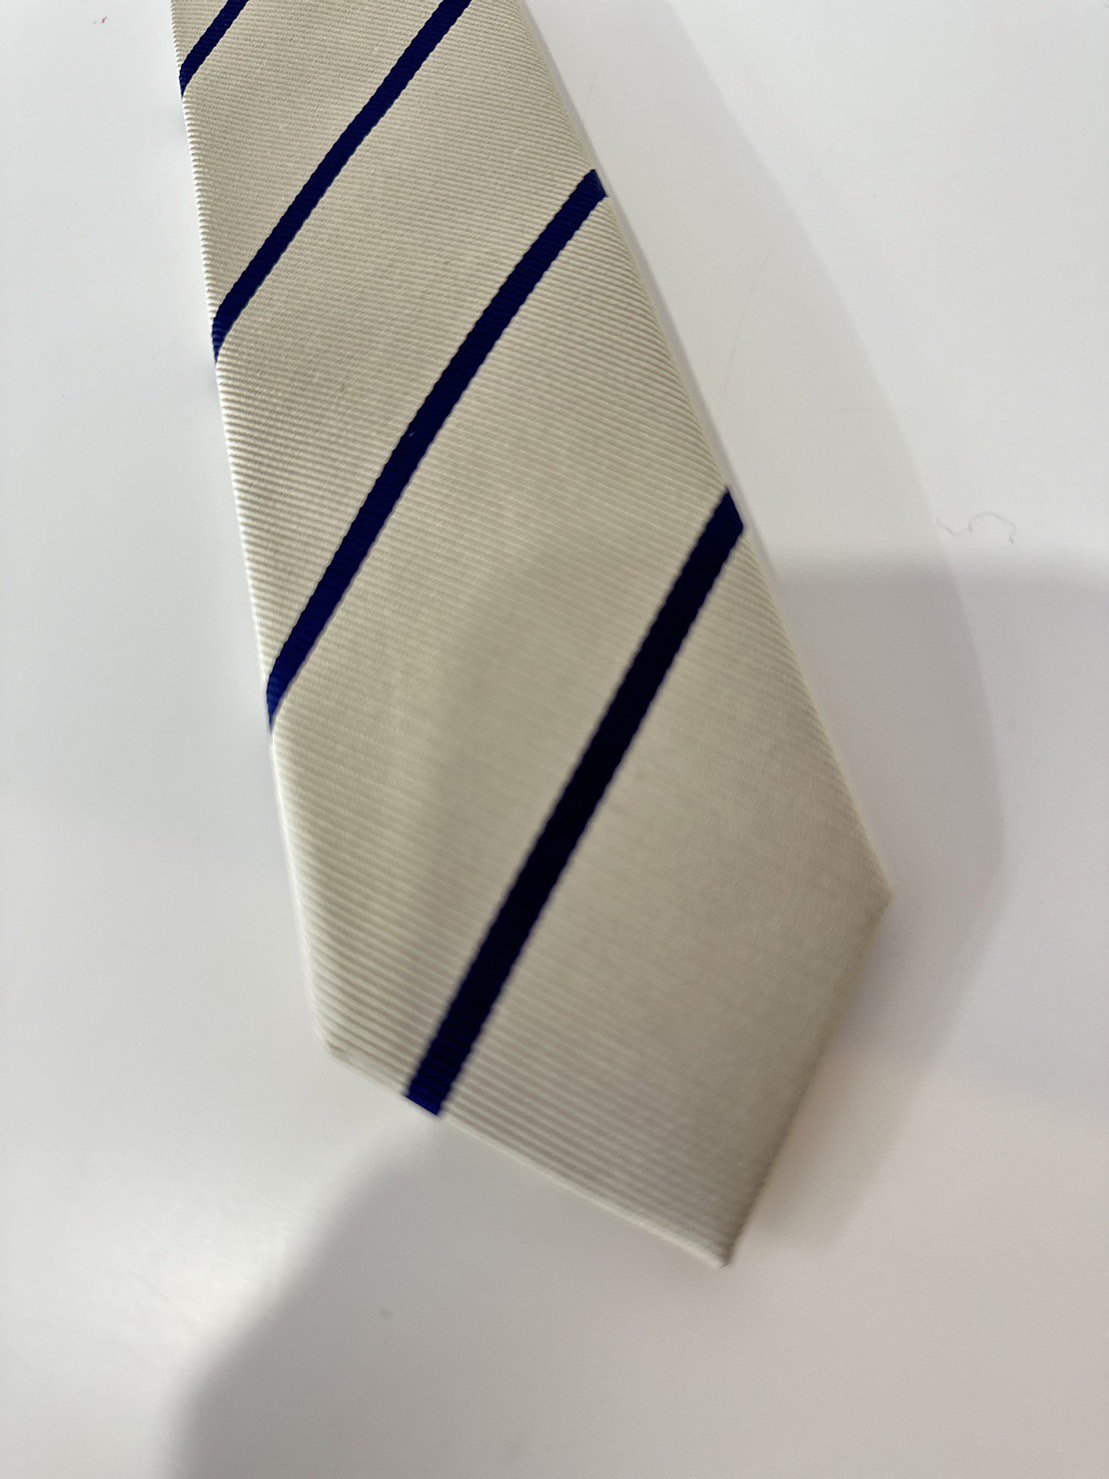 LITTLEBIG<br />Resimental Tie 1 / Beige&Navy<img class='new_mark_img2' src='https://img.shop-pro.jp/img/new/icons47.gif' style='border:none;display:inline;margin:0px;padding:0px;width:auto;' />